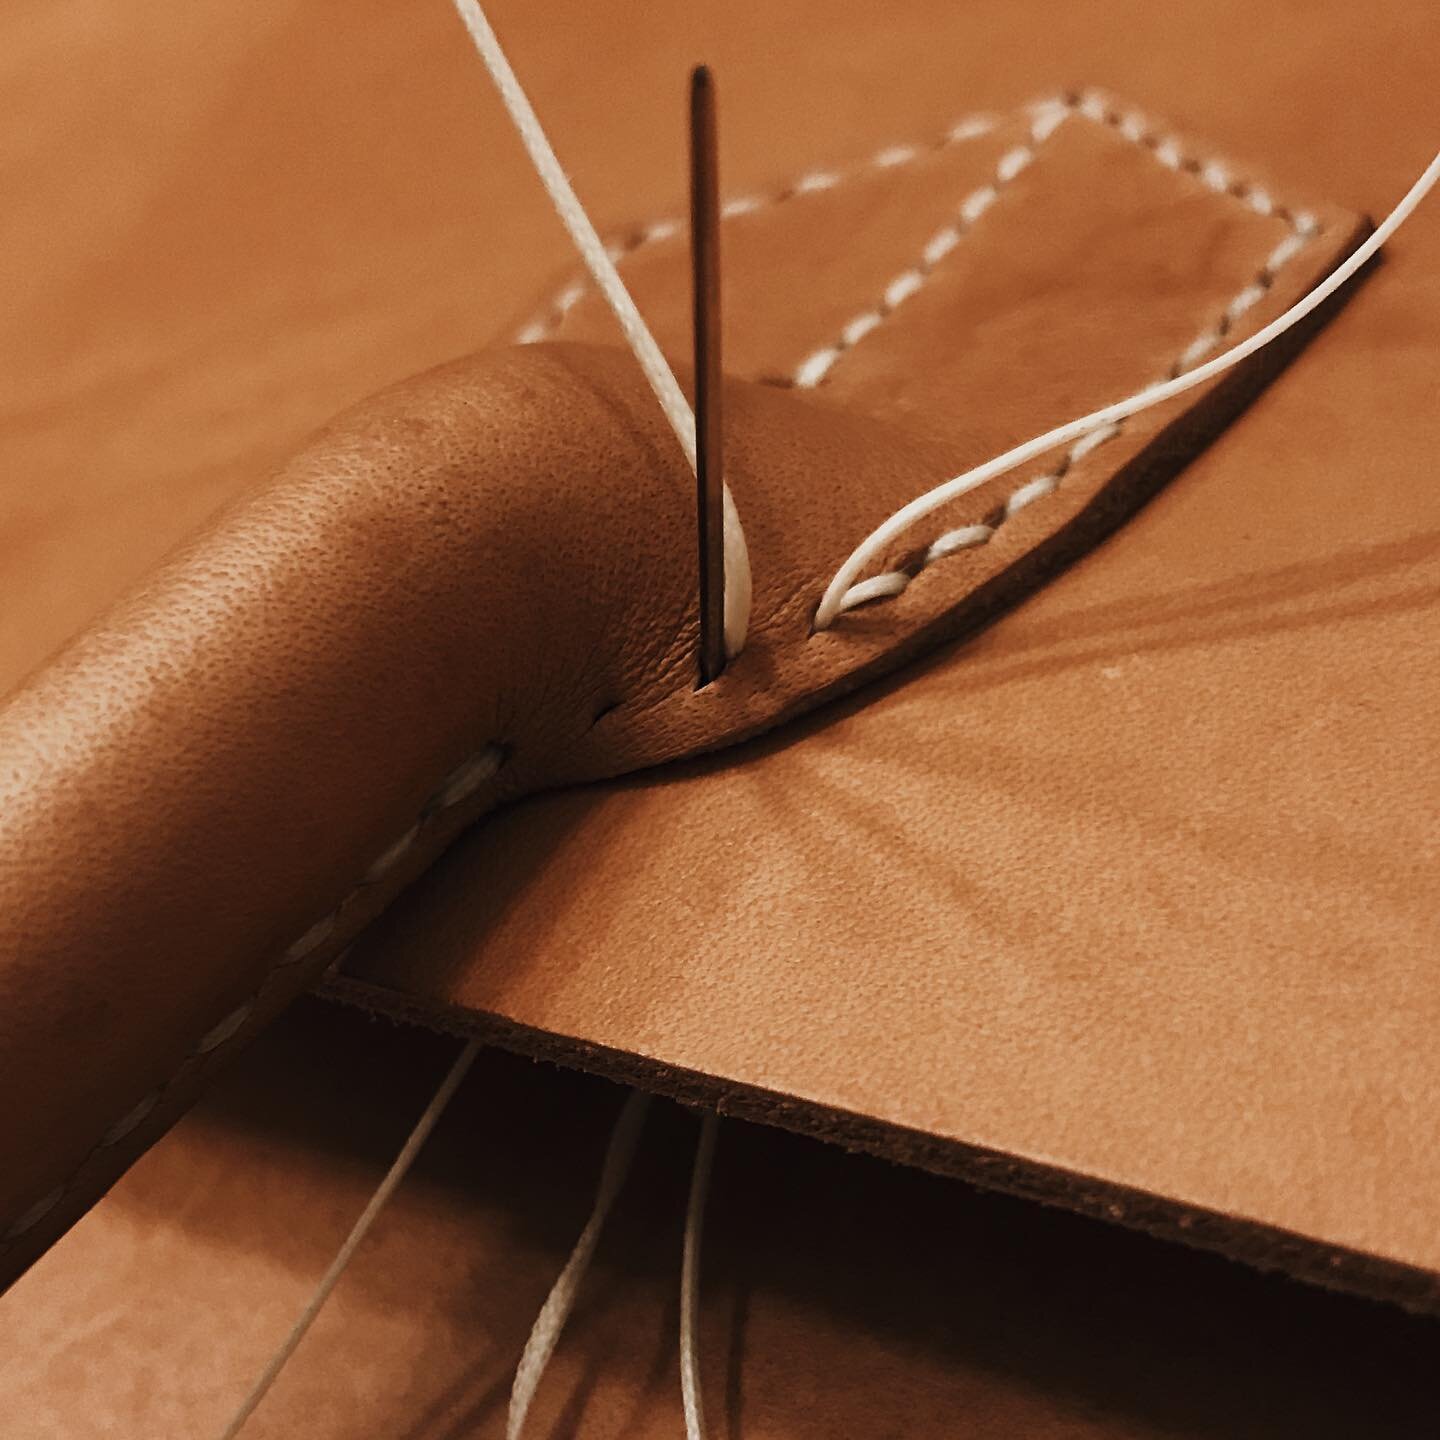 Handstitching the handles on the Classic Tote, available soon on guigo.shop.